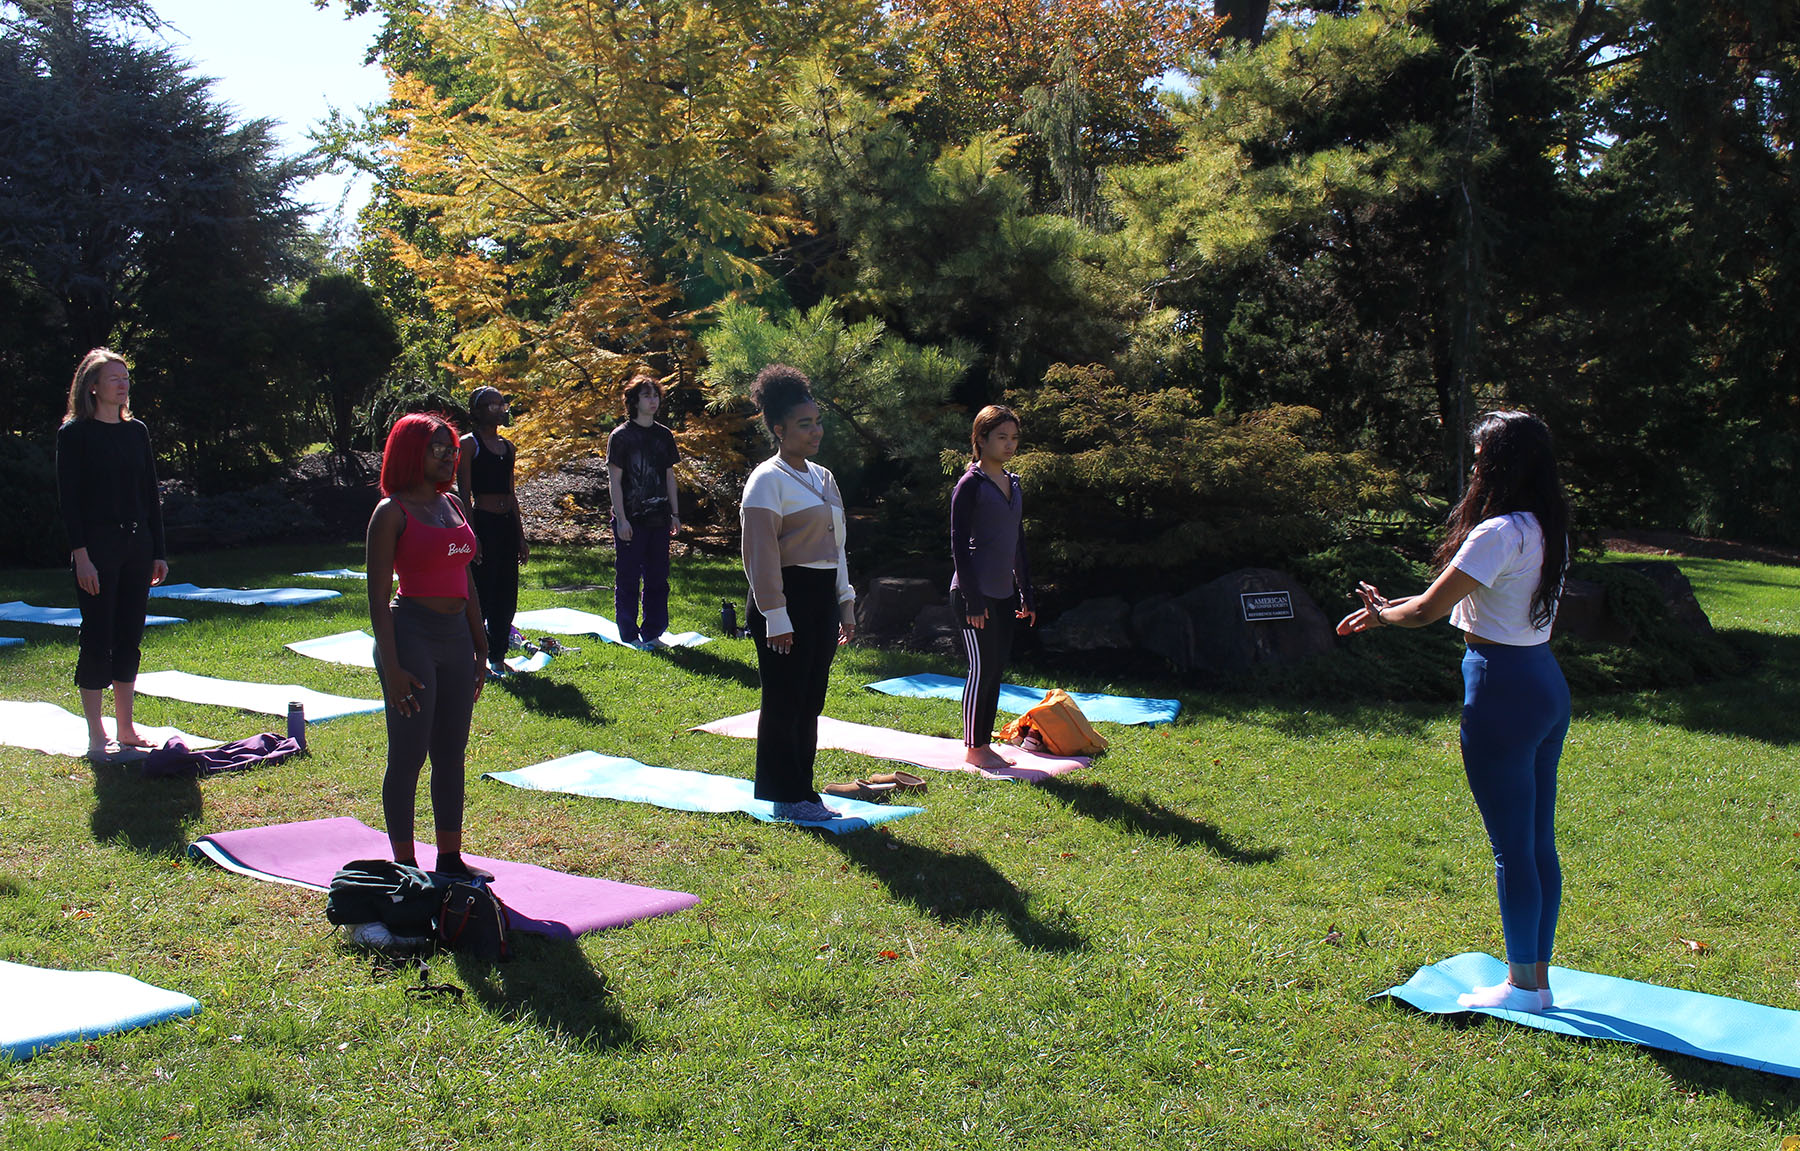 Temple University Ambler will host Wellness Day Activities from 11 a.m. to 3:30 p.m. on Friday, October 13.